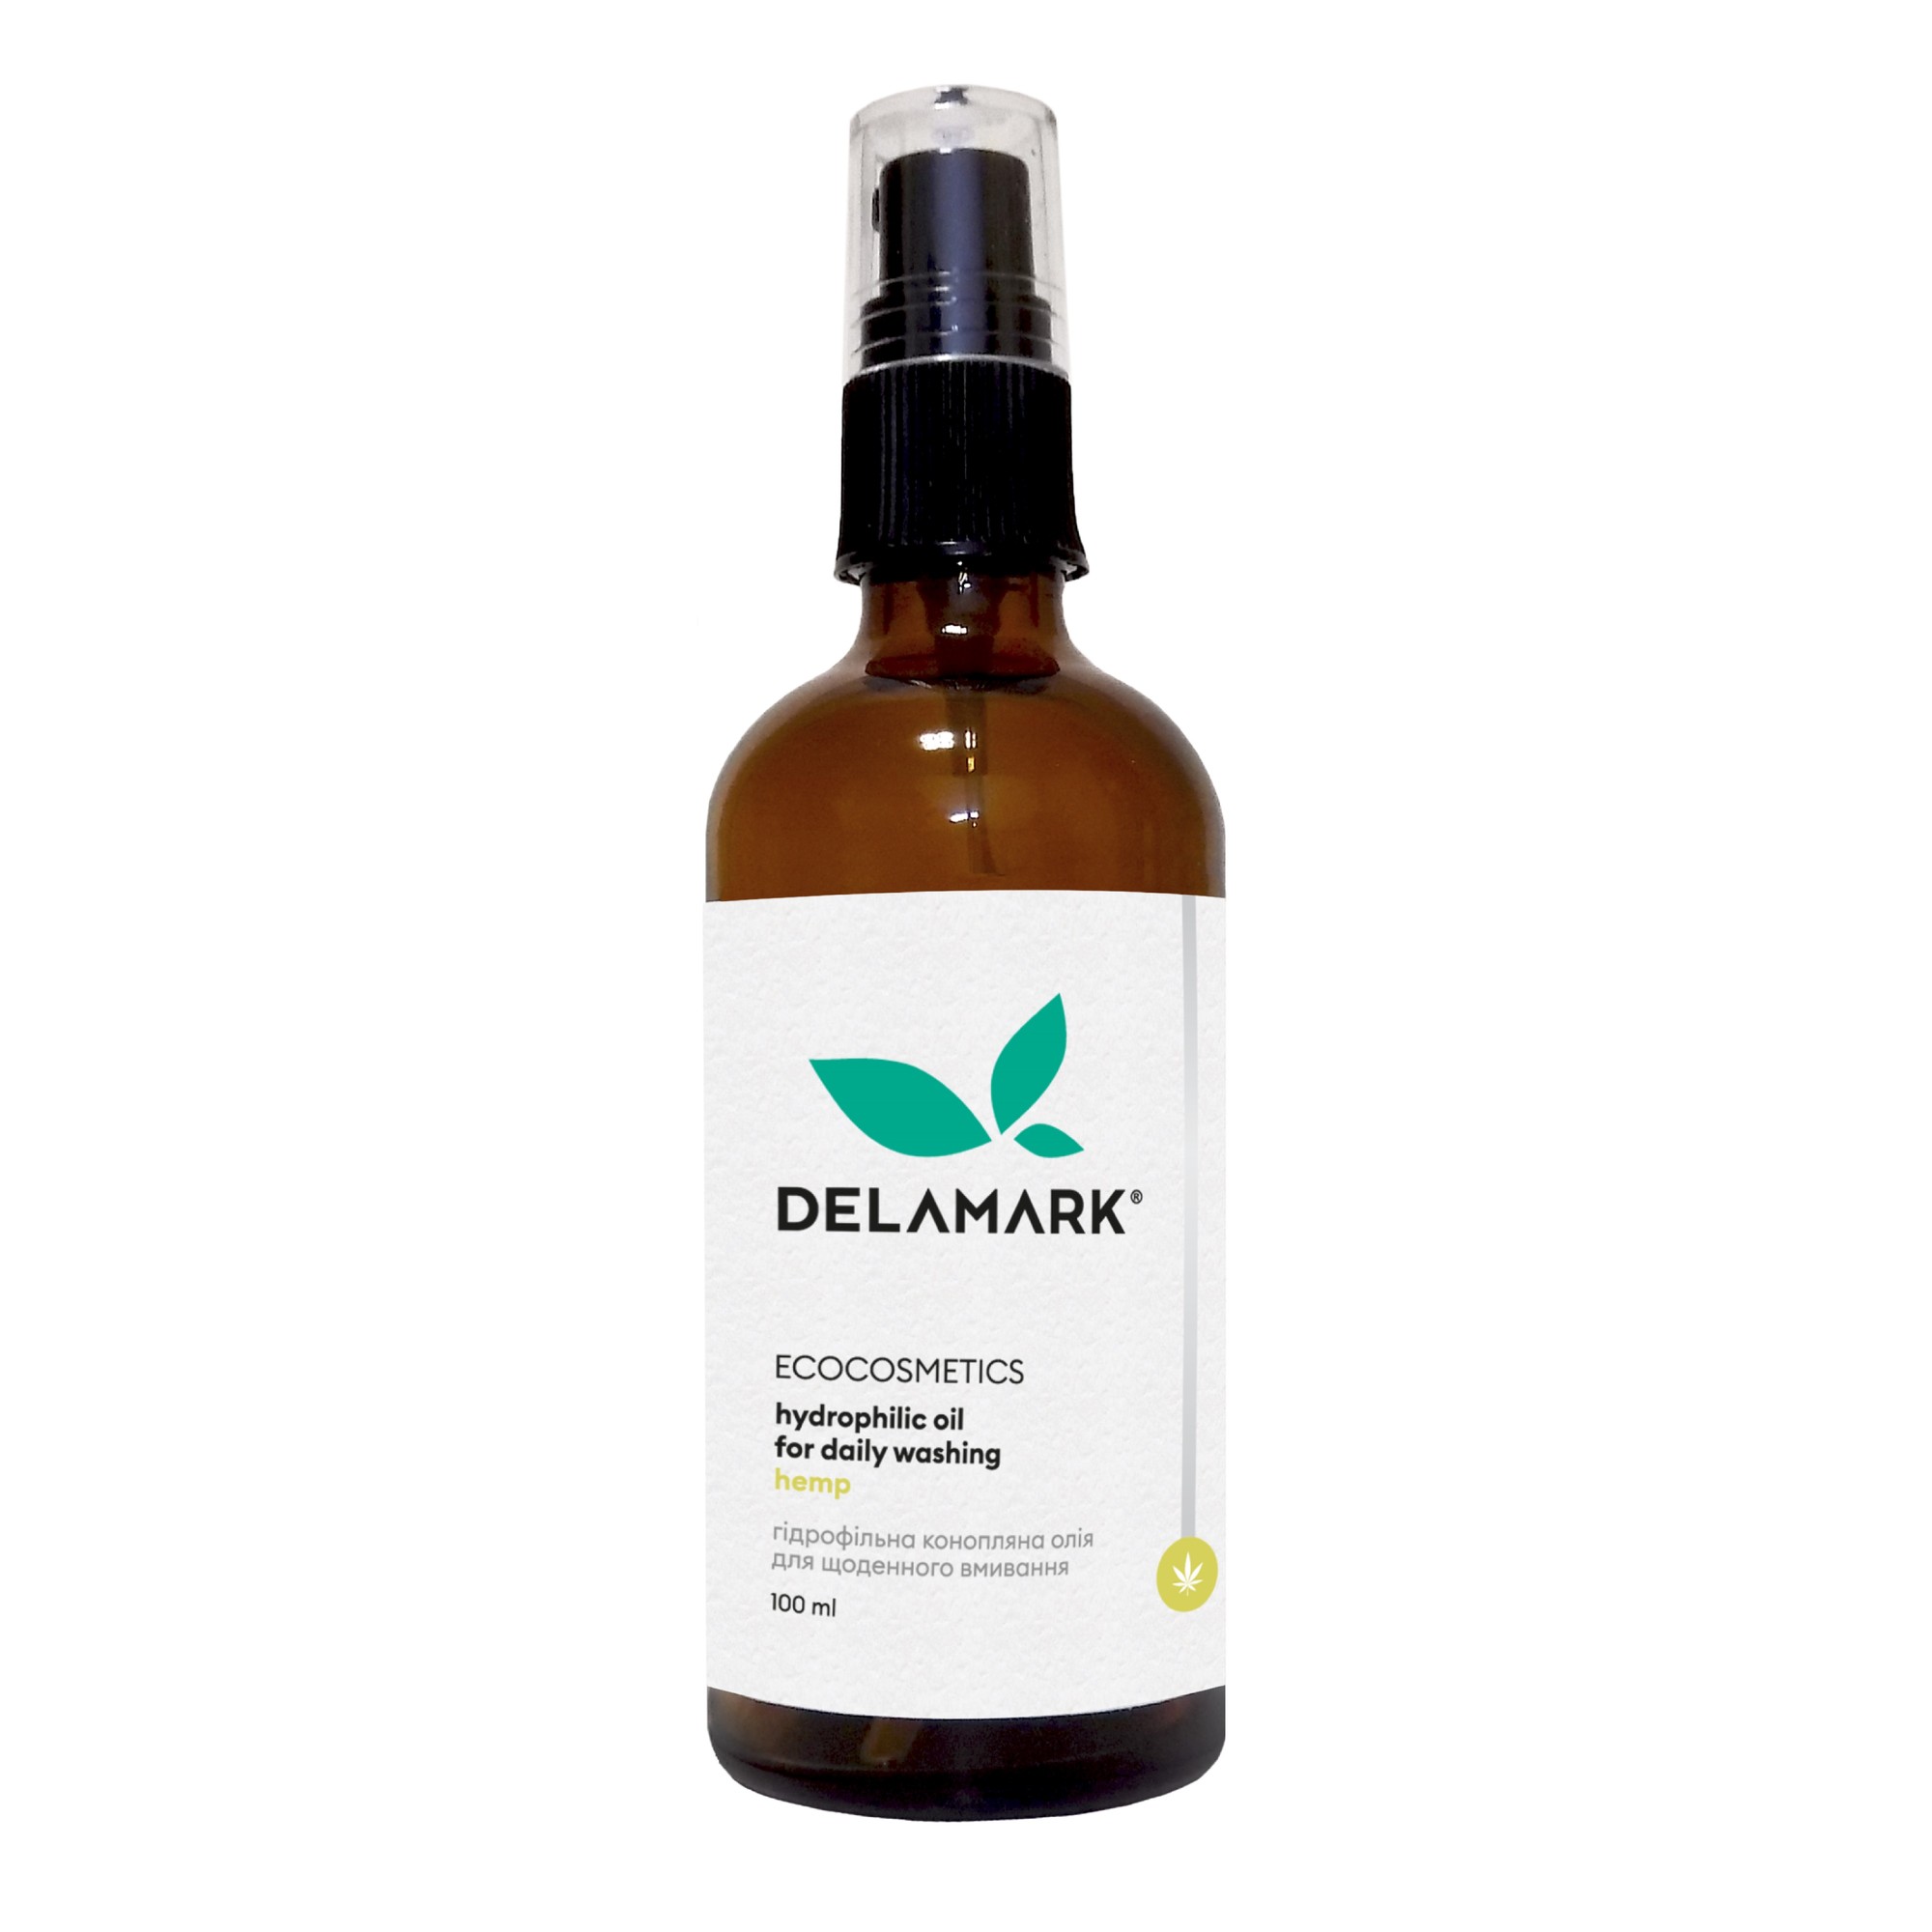 Hydrophilic cleansing face wash with hemp oil from DeLaMark, 100 ml